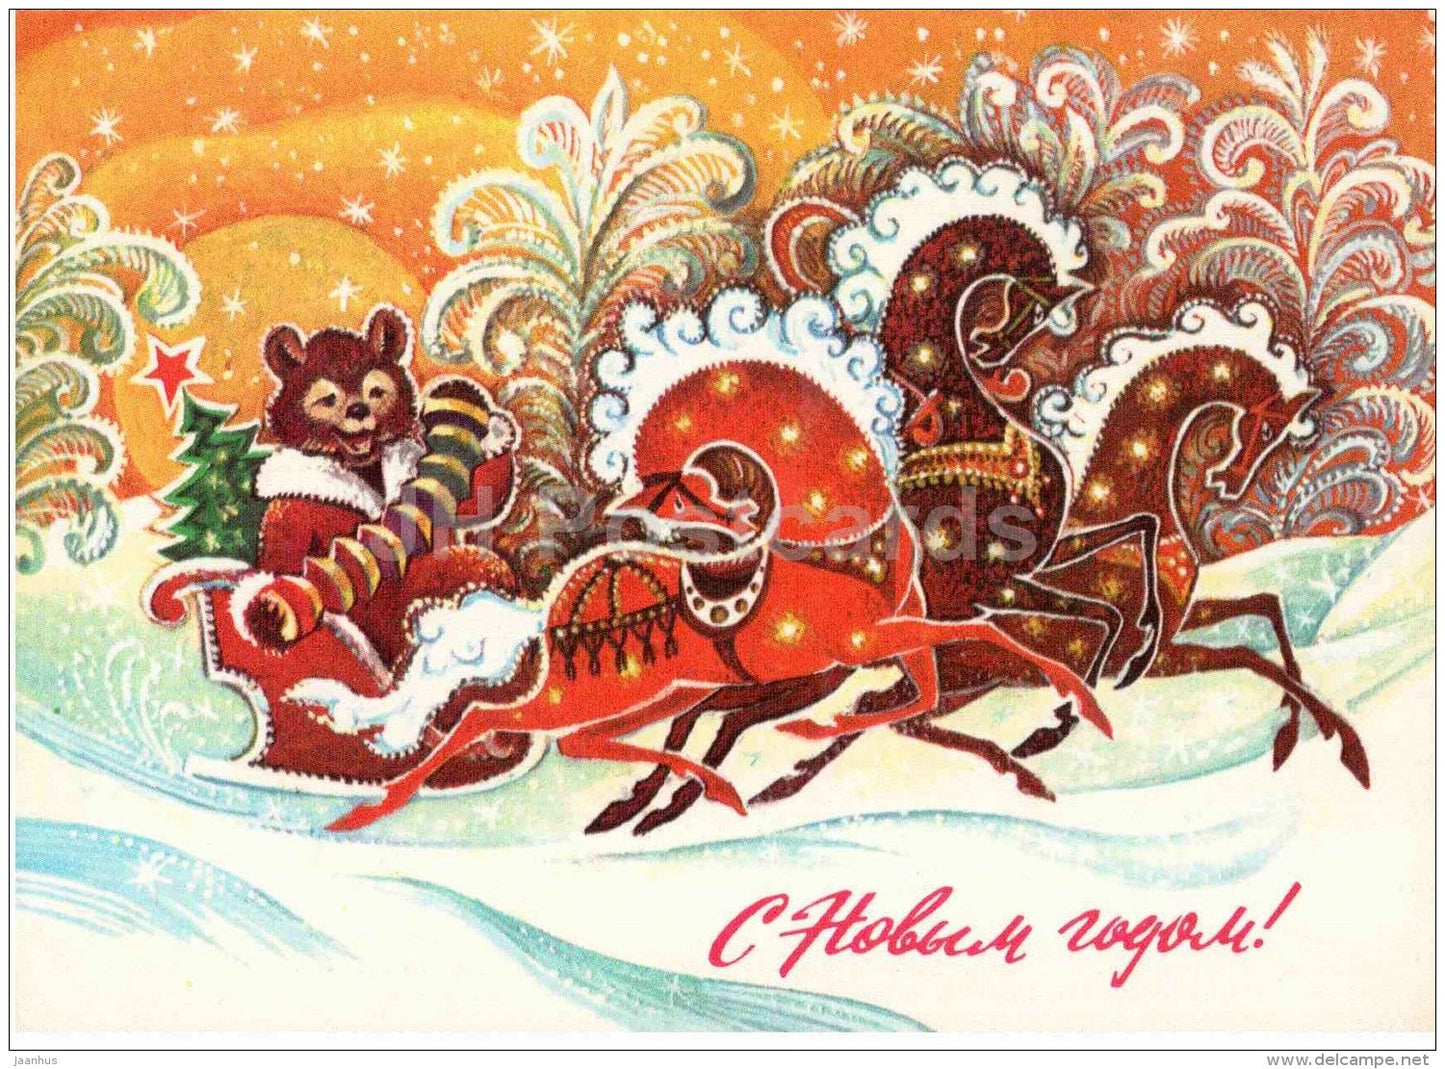 New Year Greeting Card by S. Gorlischev - russian Troika - horses - bear - postal stationery - 1978 - Russia USSR - JH Postcards